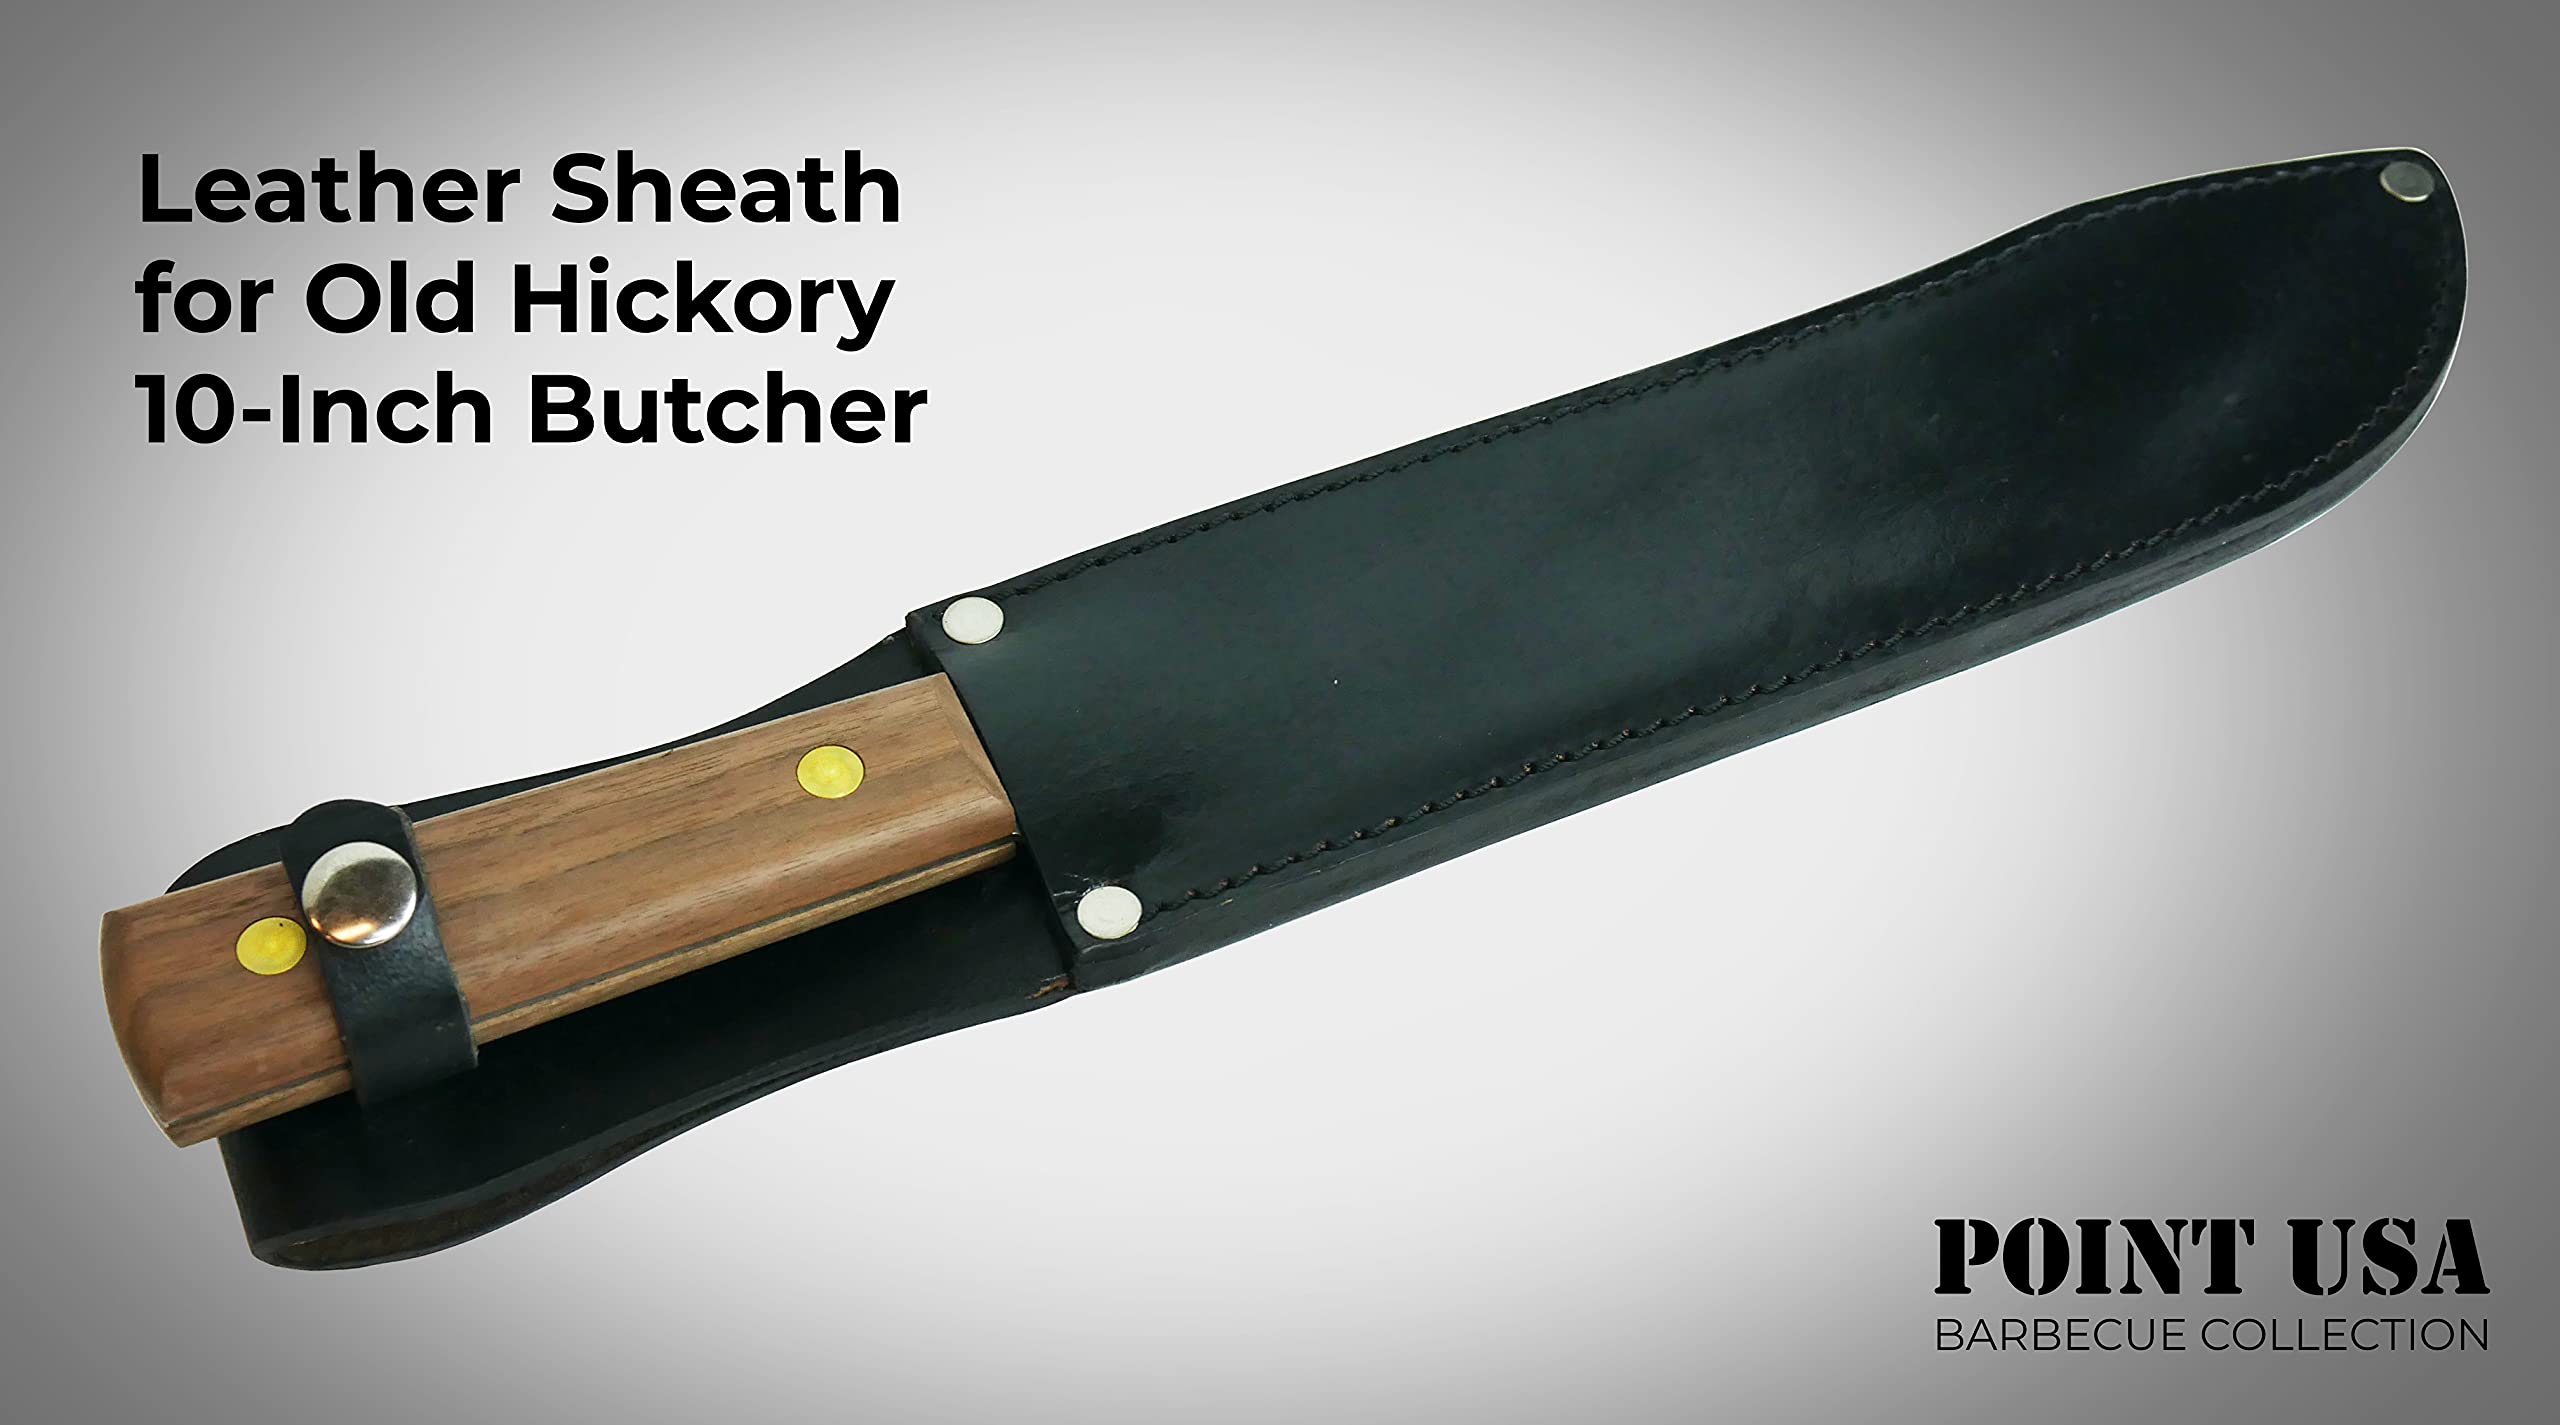 Generic 10 inch Knife Sheath - Made to Fit 10-Inch Old Hickory Butcher Knives OKC Leather with Belt Loop in Color Black (10 Inch)